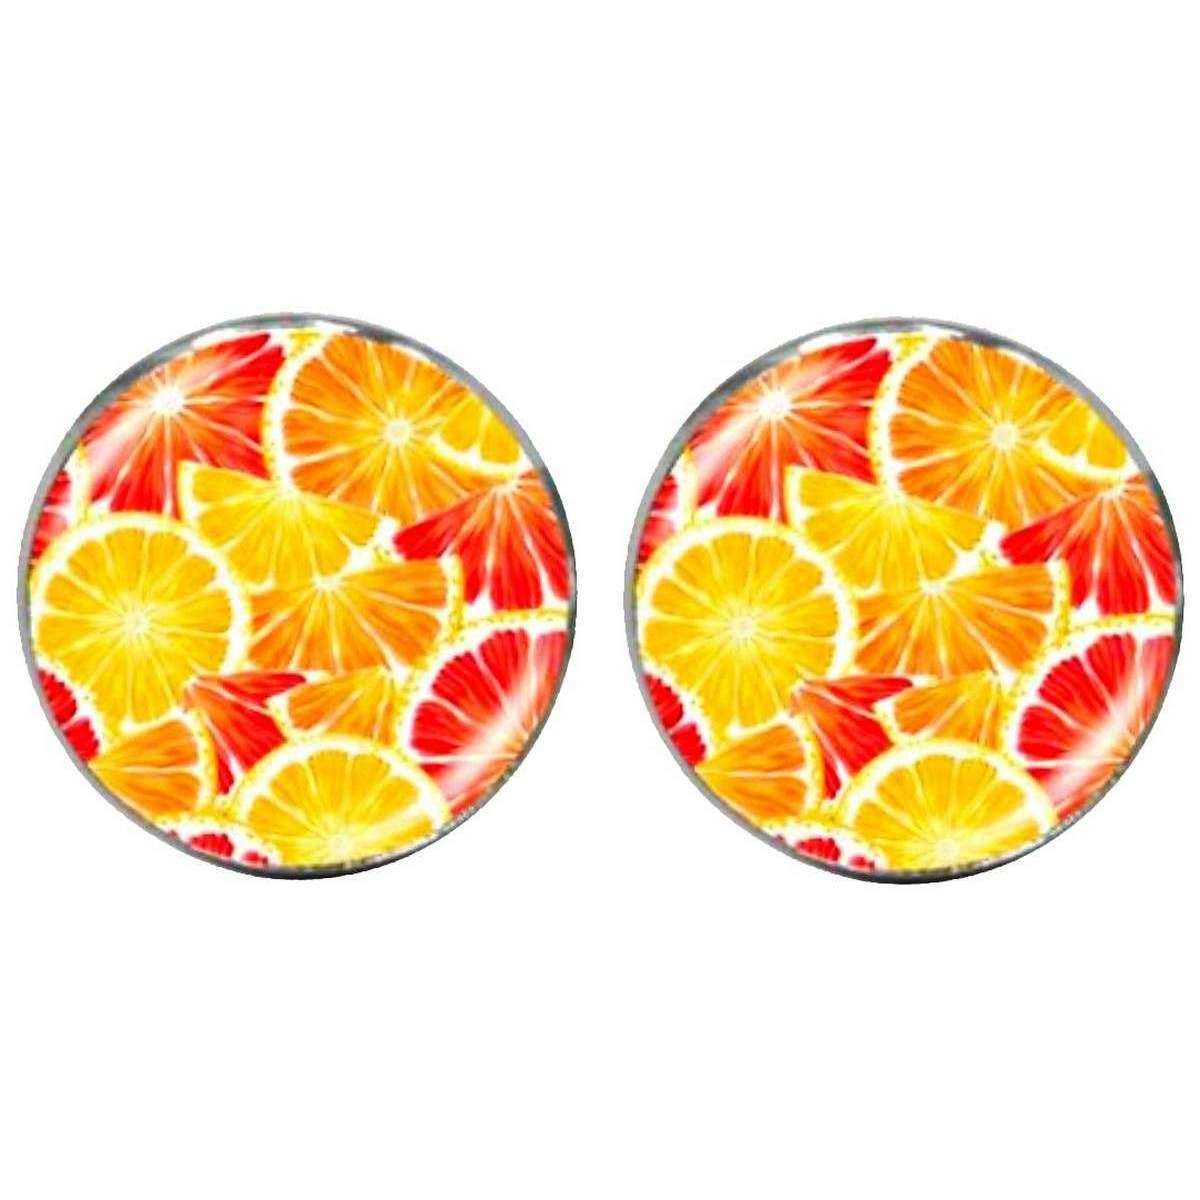 Bassin and Brown Oranges and Lemons Cabachon Cufflinks - Orange/Yellow